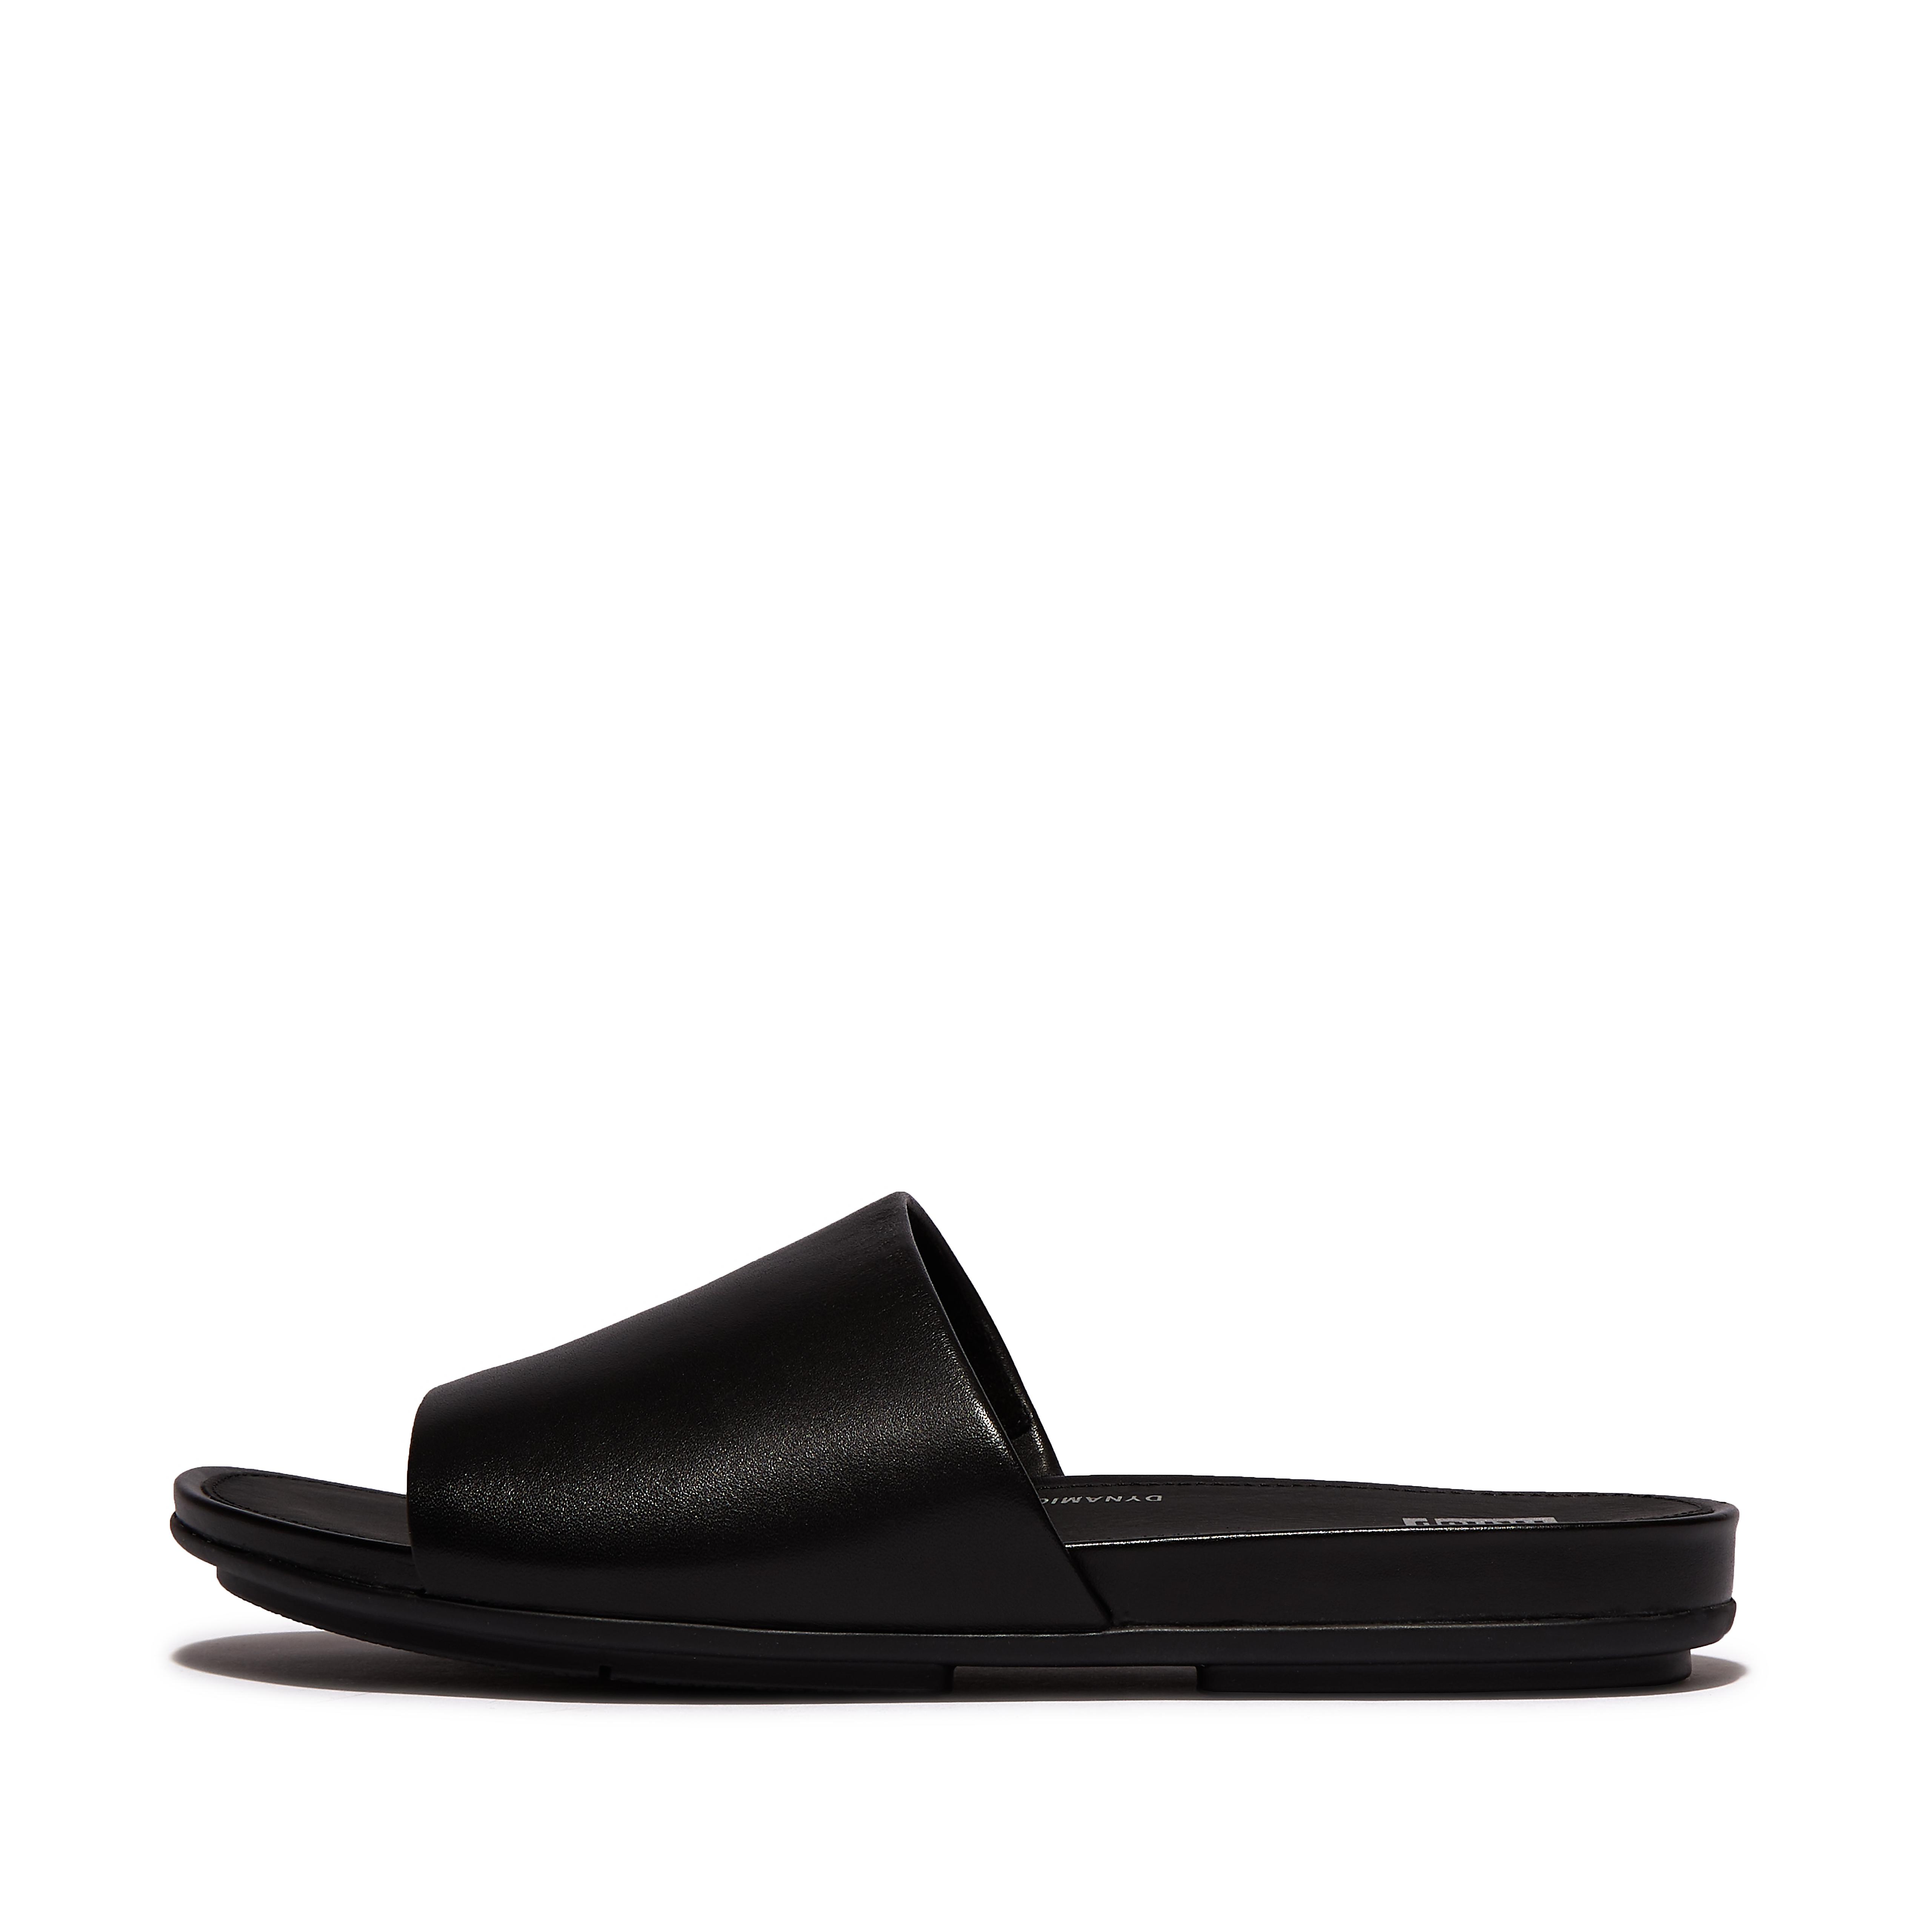 Fitflop Leather Slides,All Black